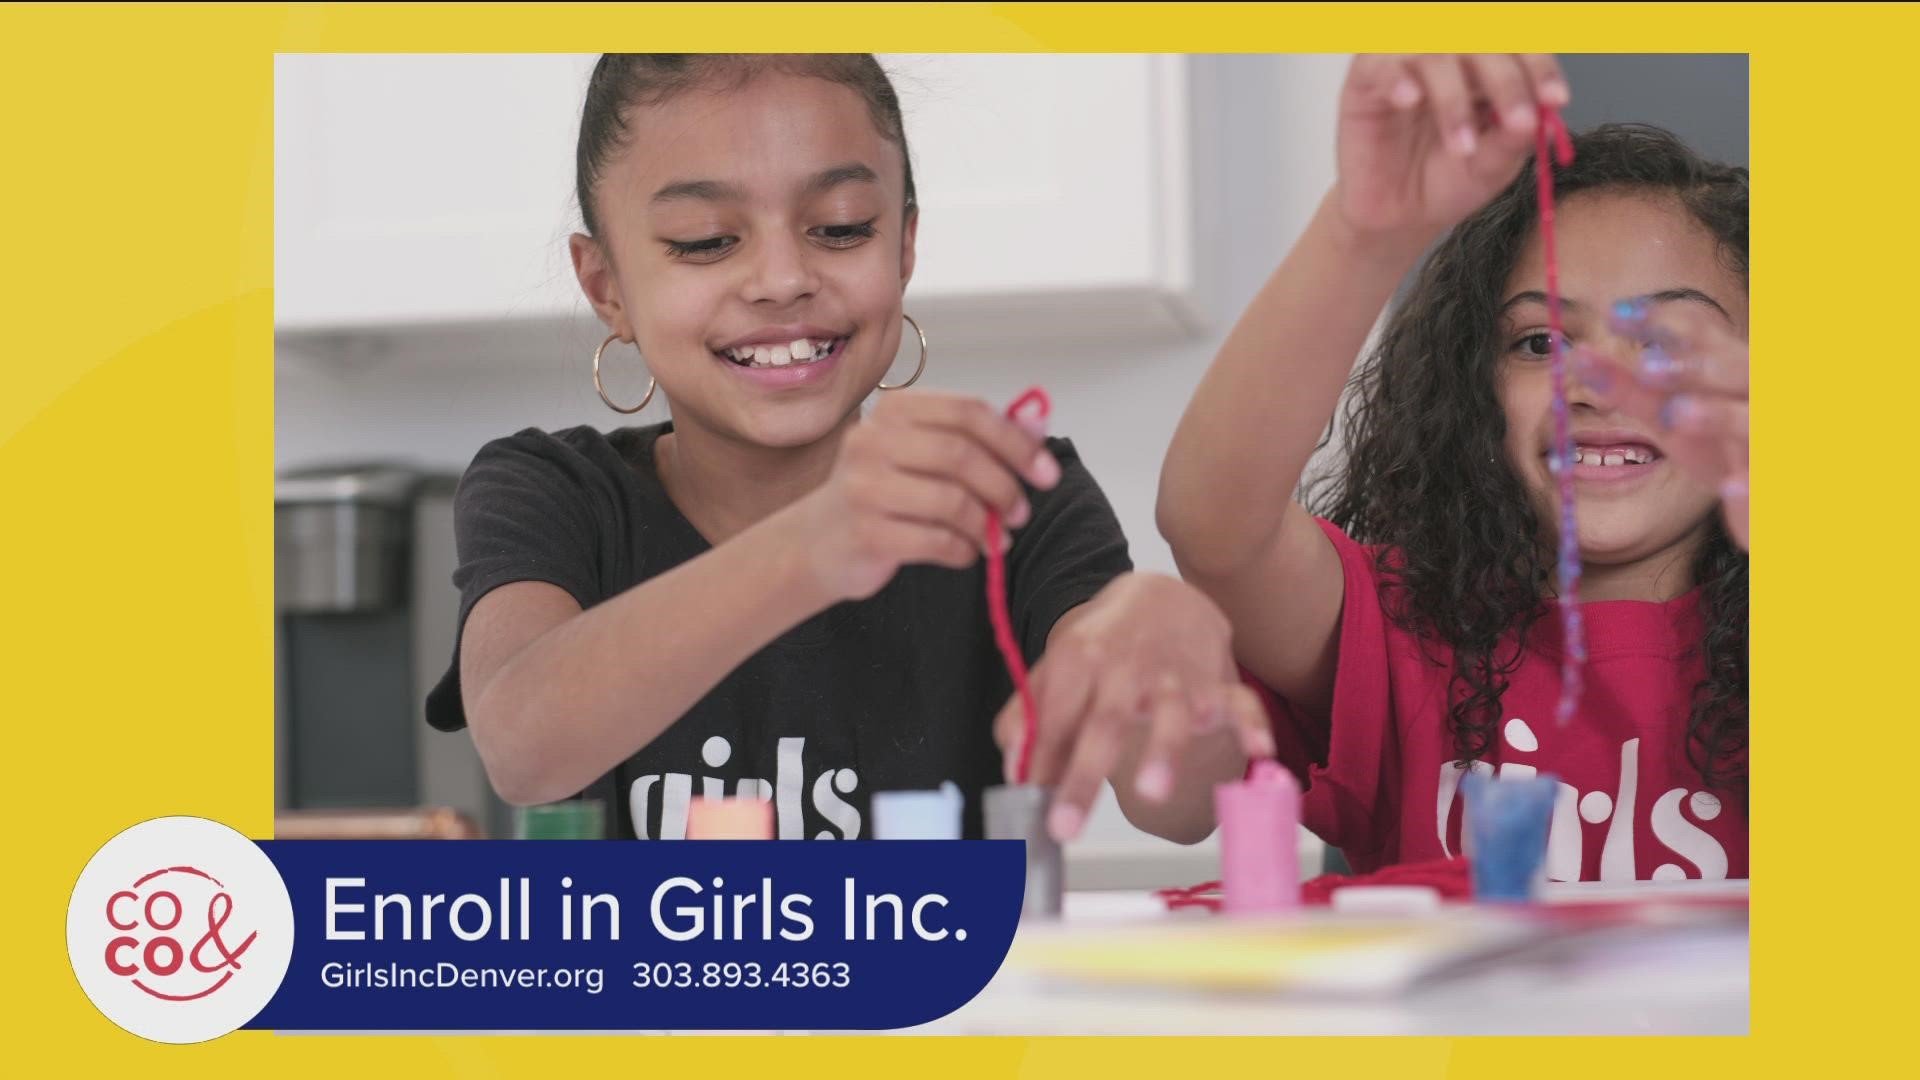 Visit GirlsIncDenver.org or call 303.893.4363 to enroll your daughter or special young lady in a Girls Inc. program.